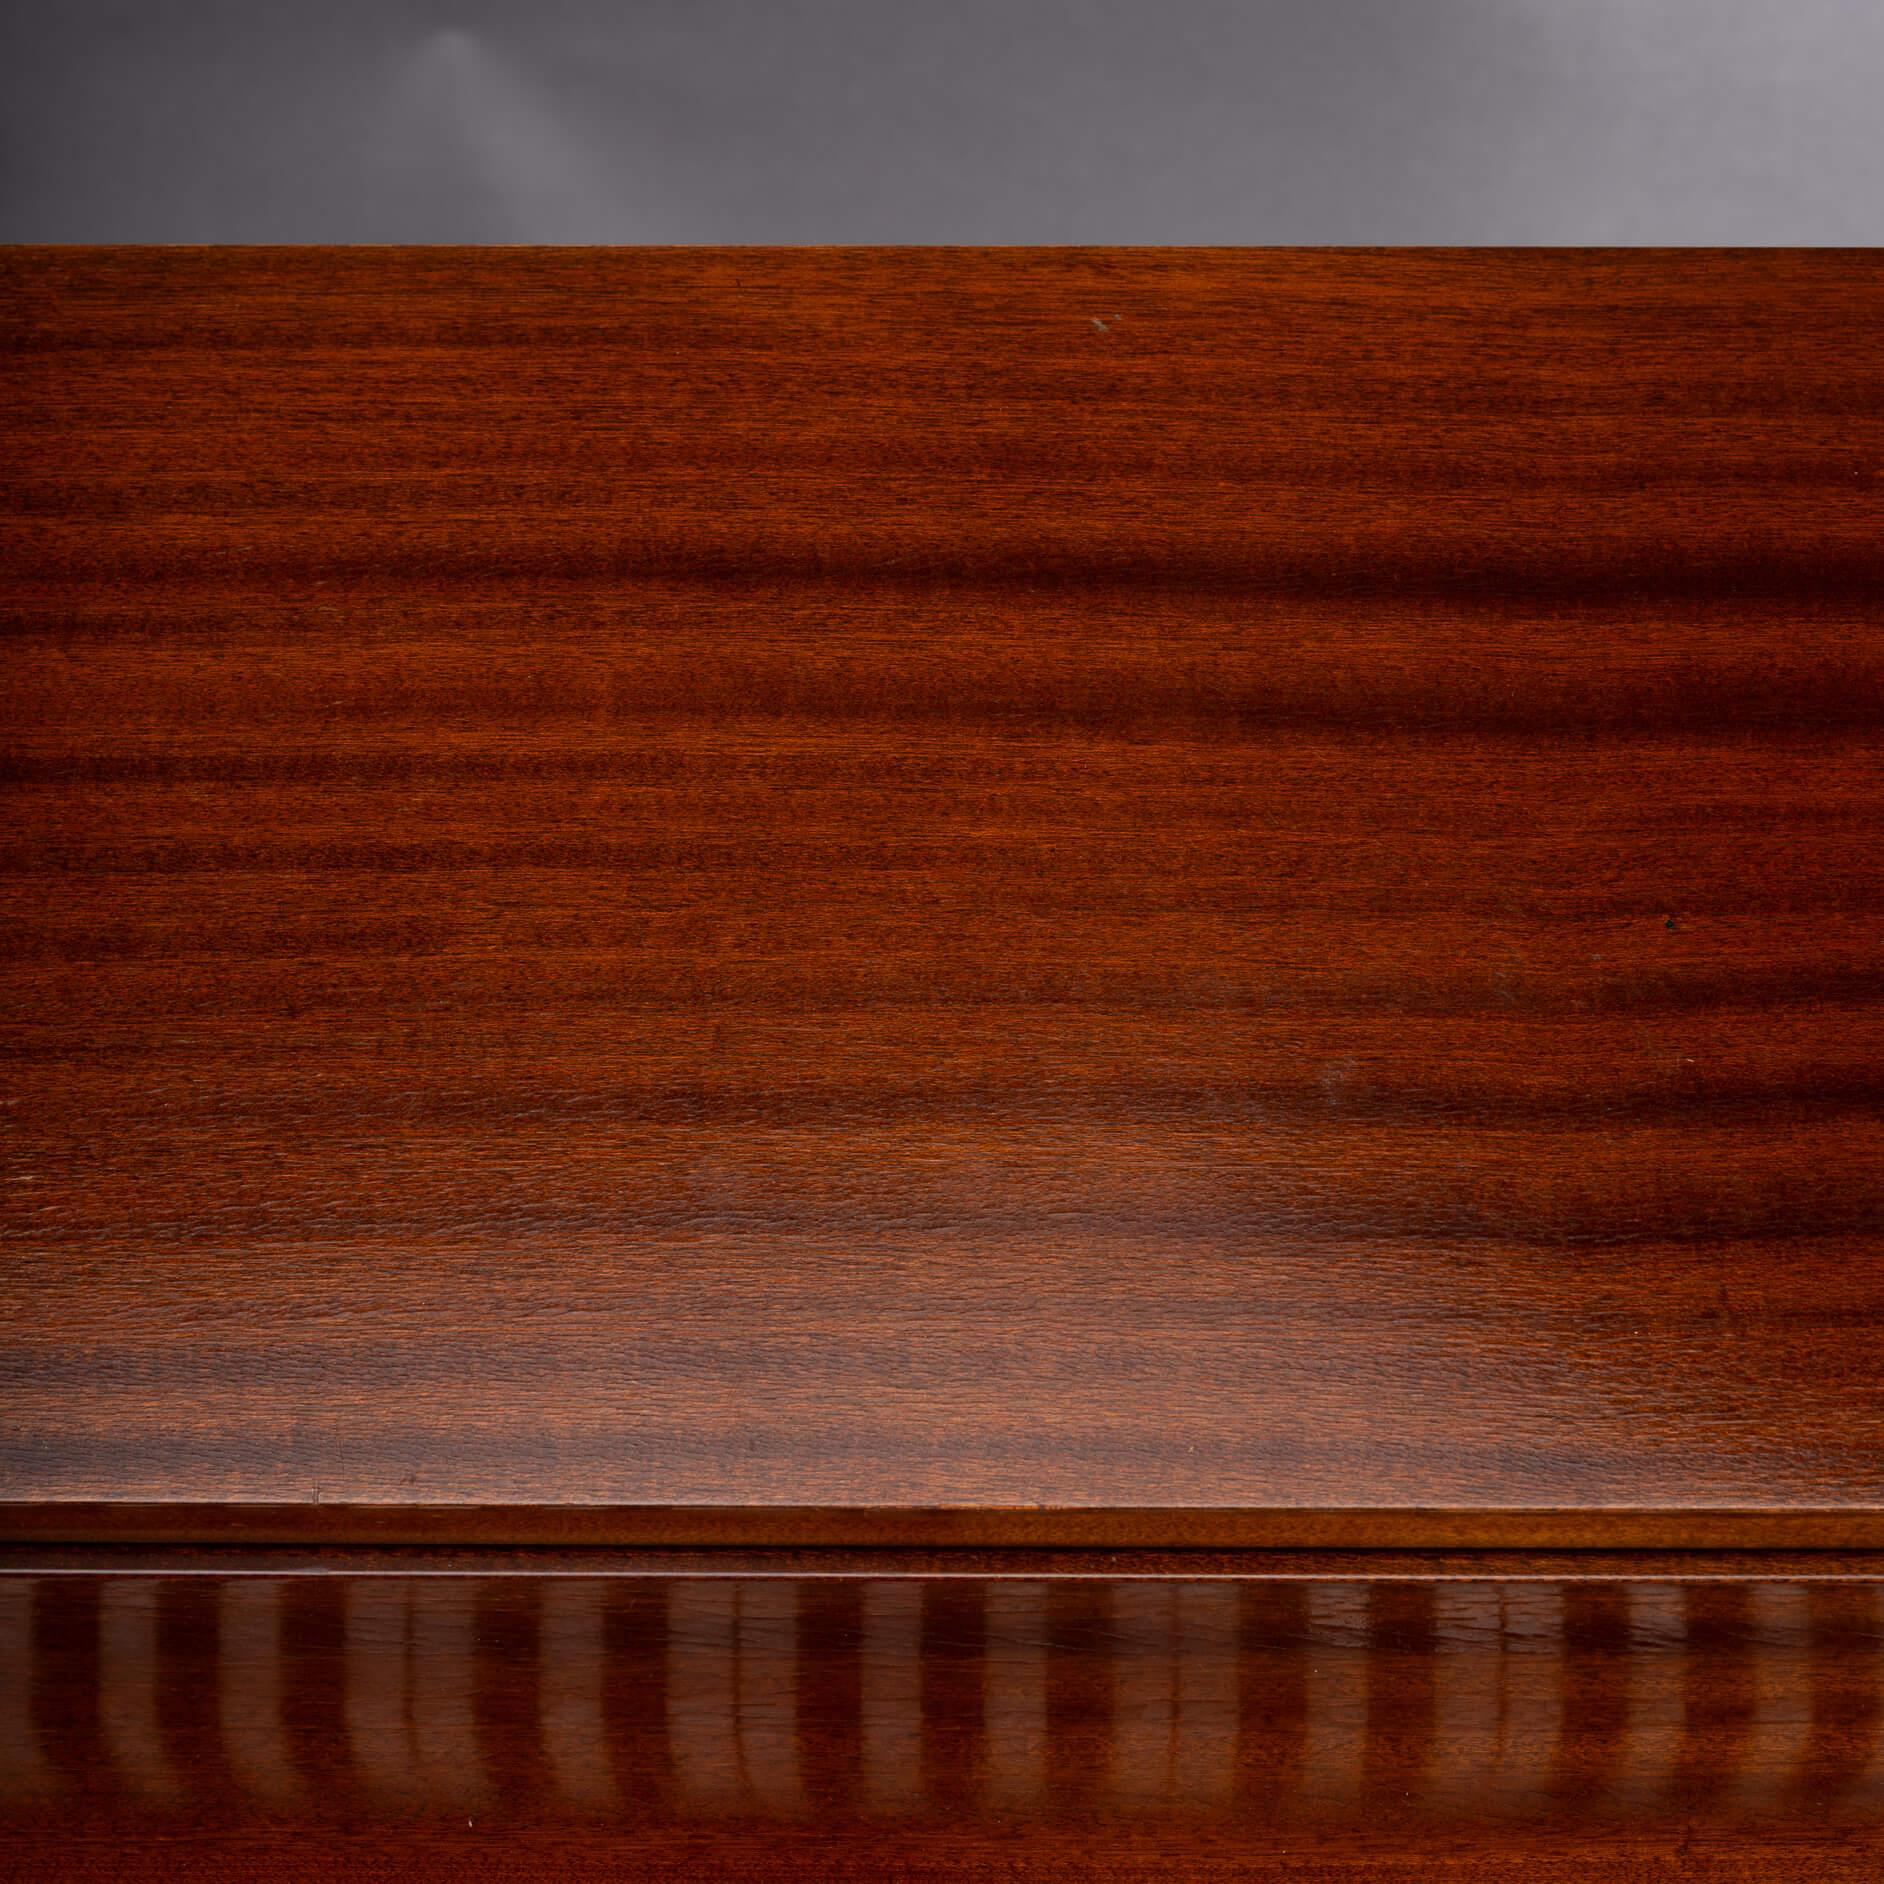 Danish Design Midcentury Pianette by Louis Zwicki in Mahogany, 1950s For Sale 4